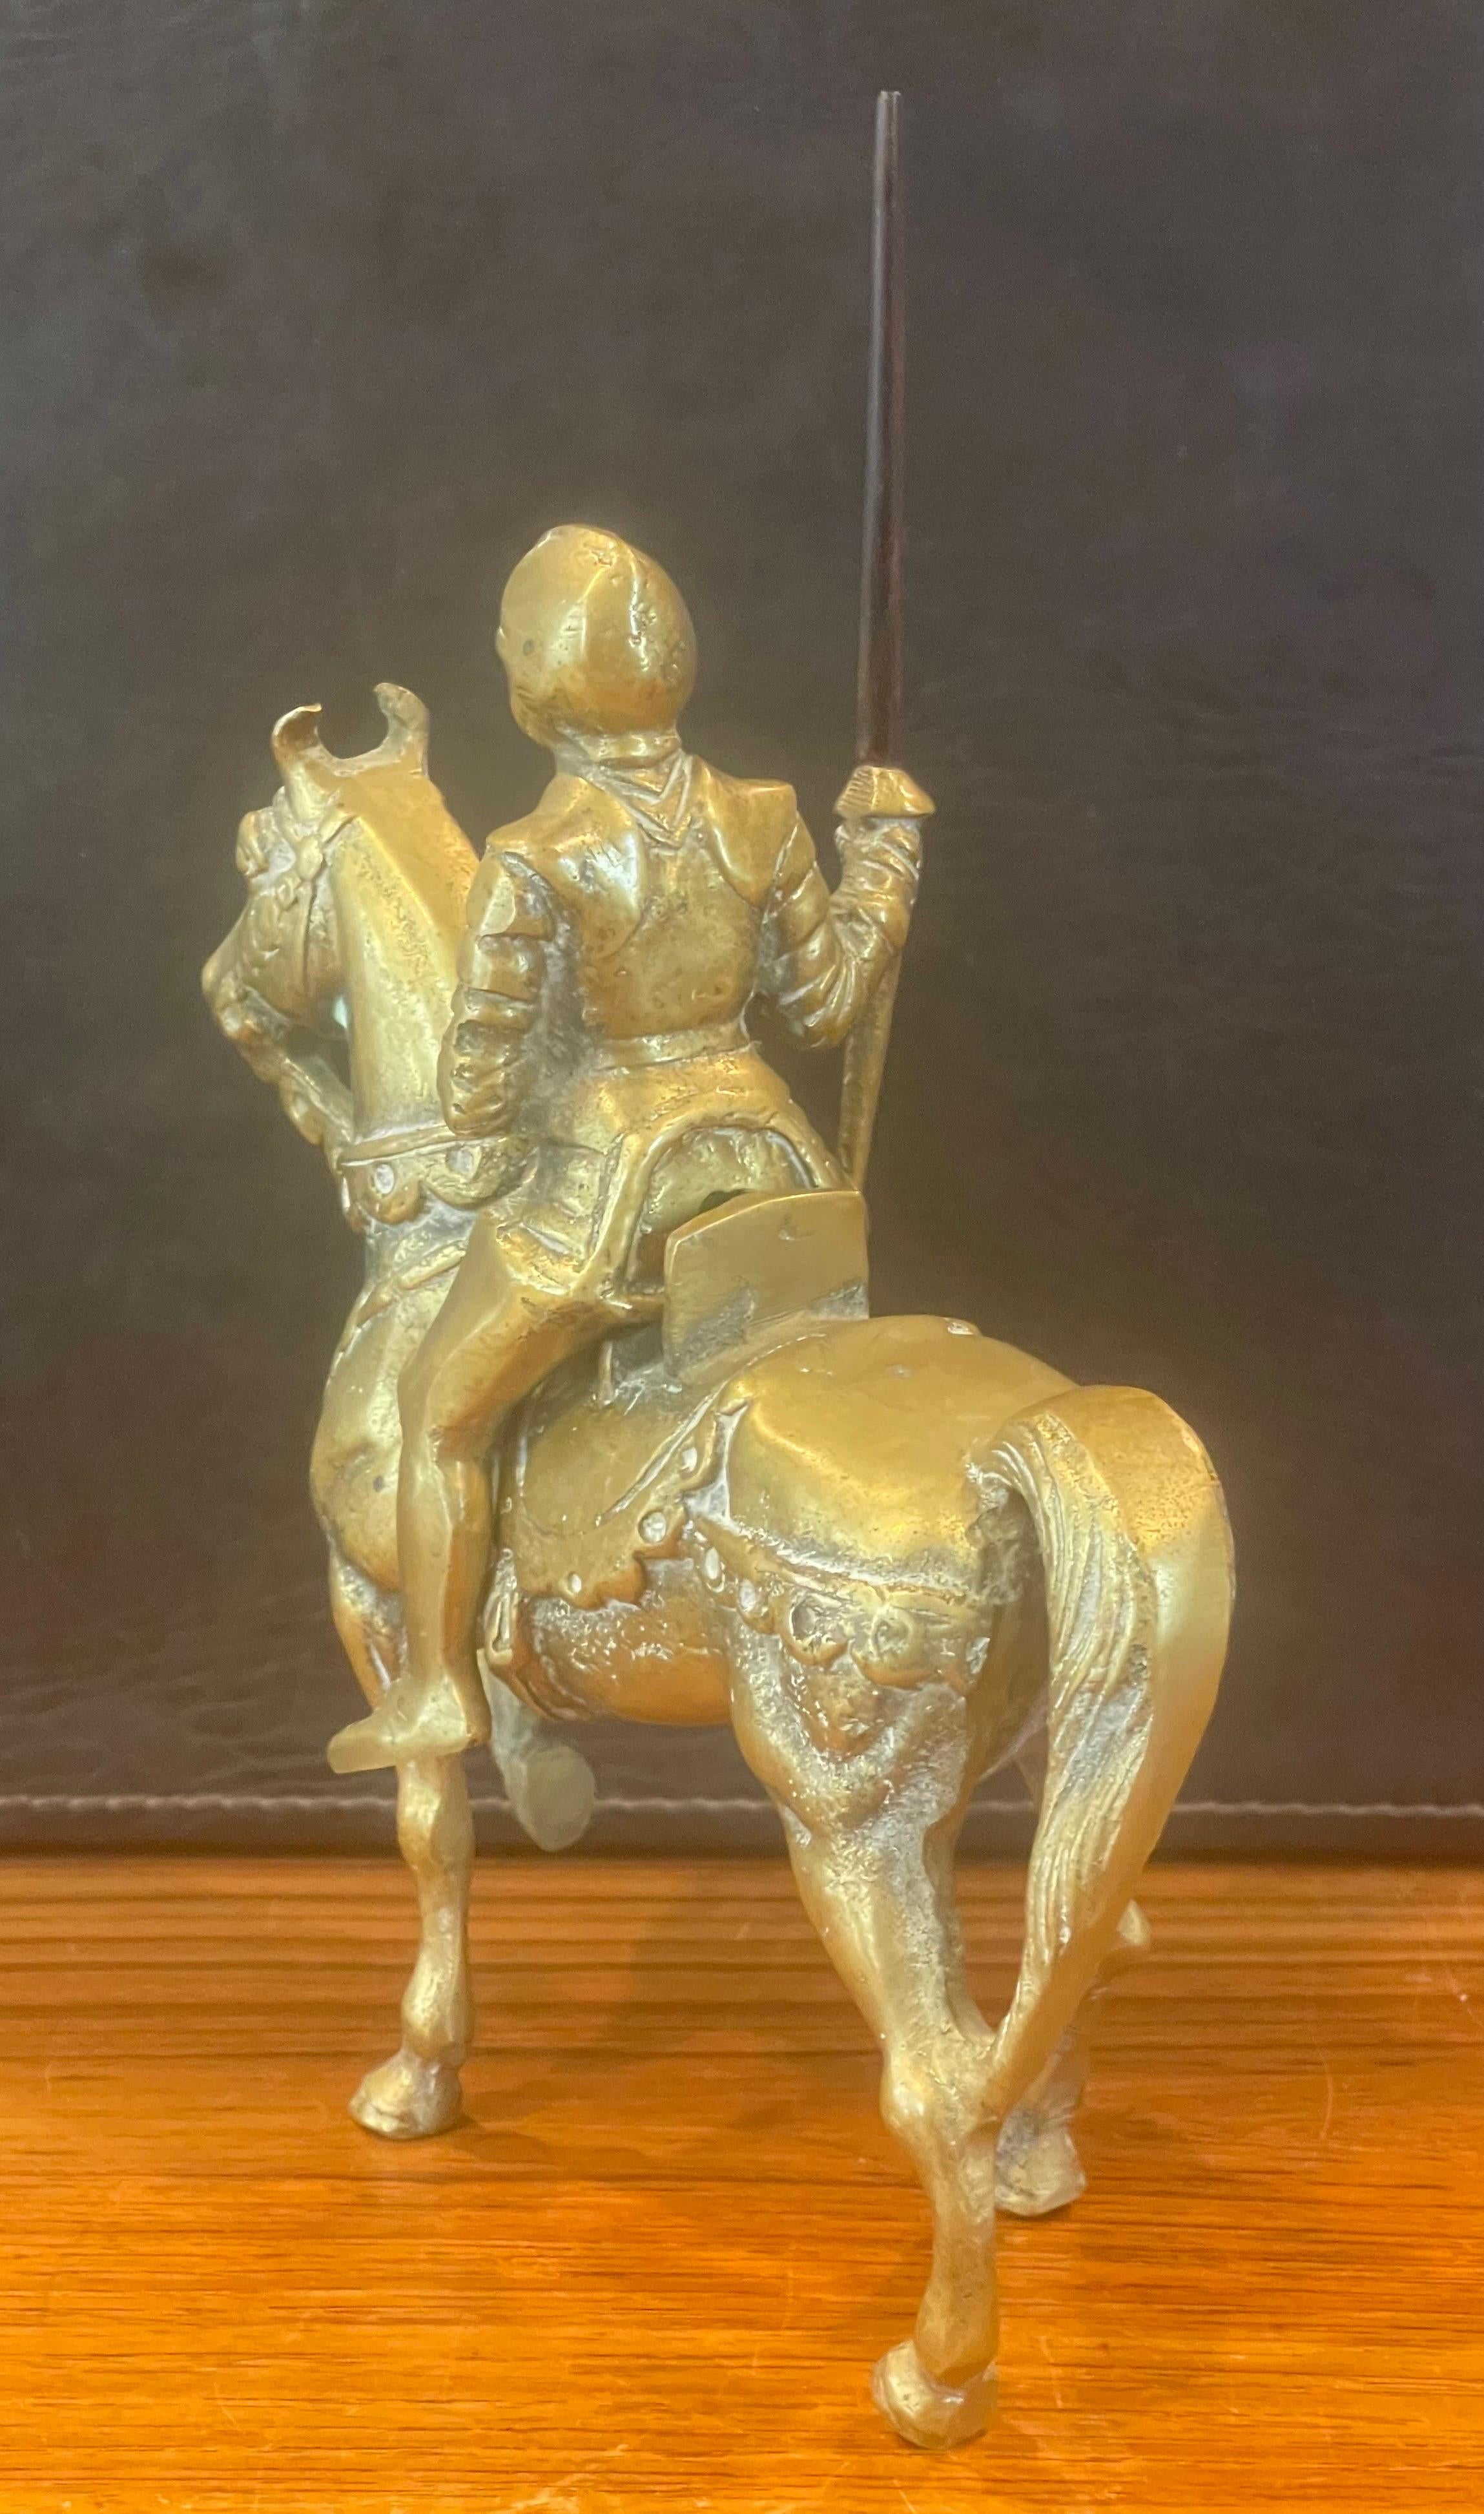 Solid Cast Brass Medieval Armored Knight on Horse Sculpture In Good Condition For Sale In San Diego, CA